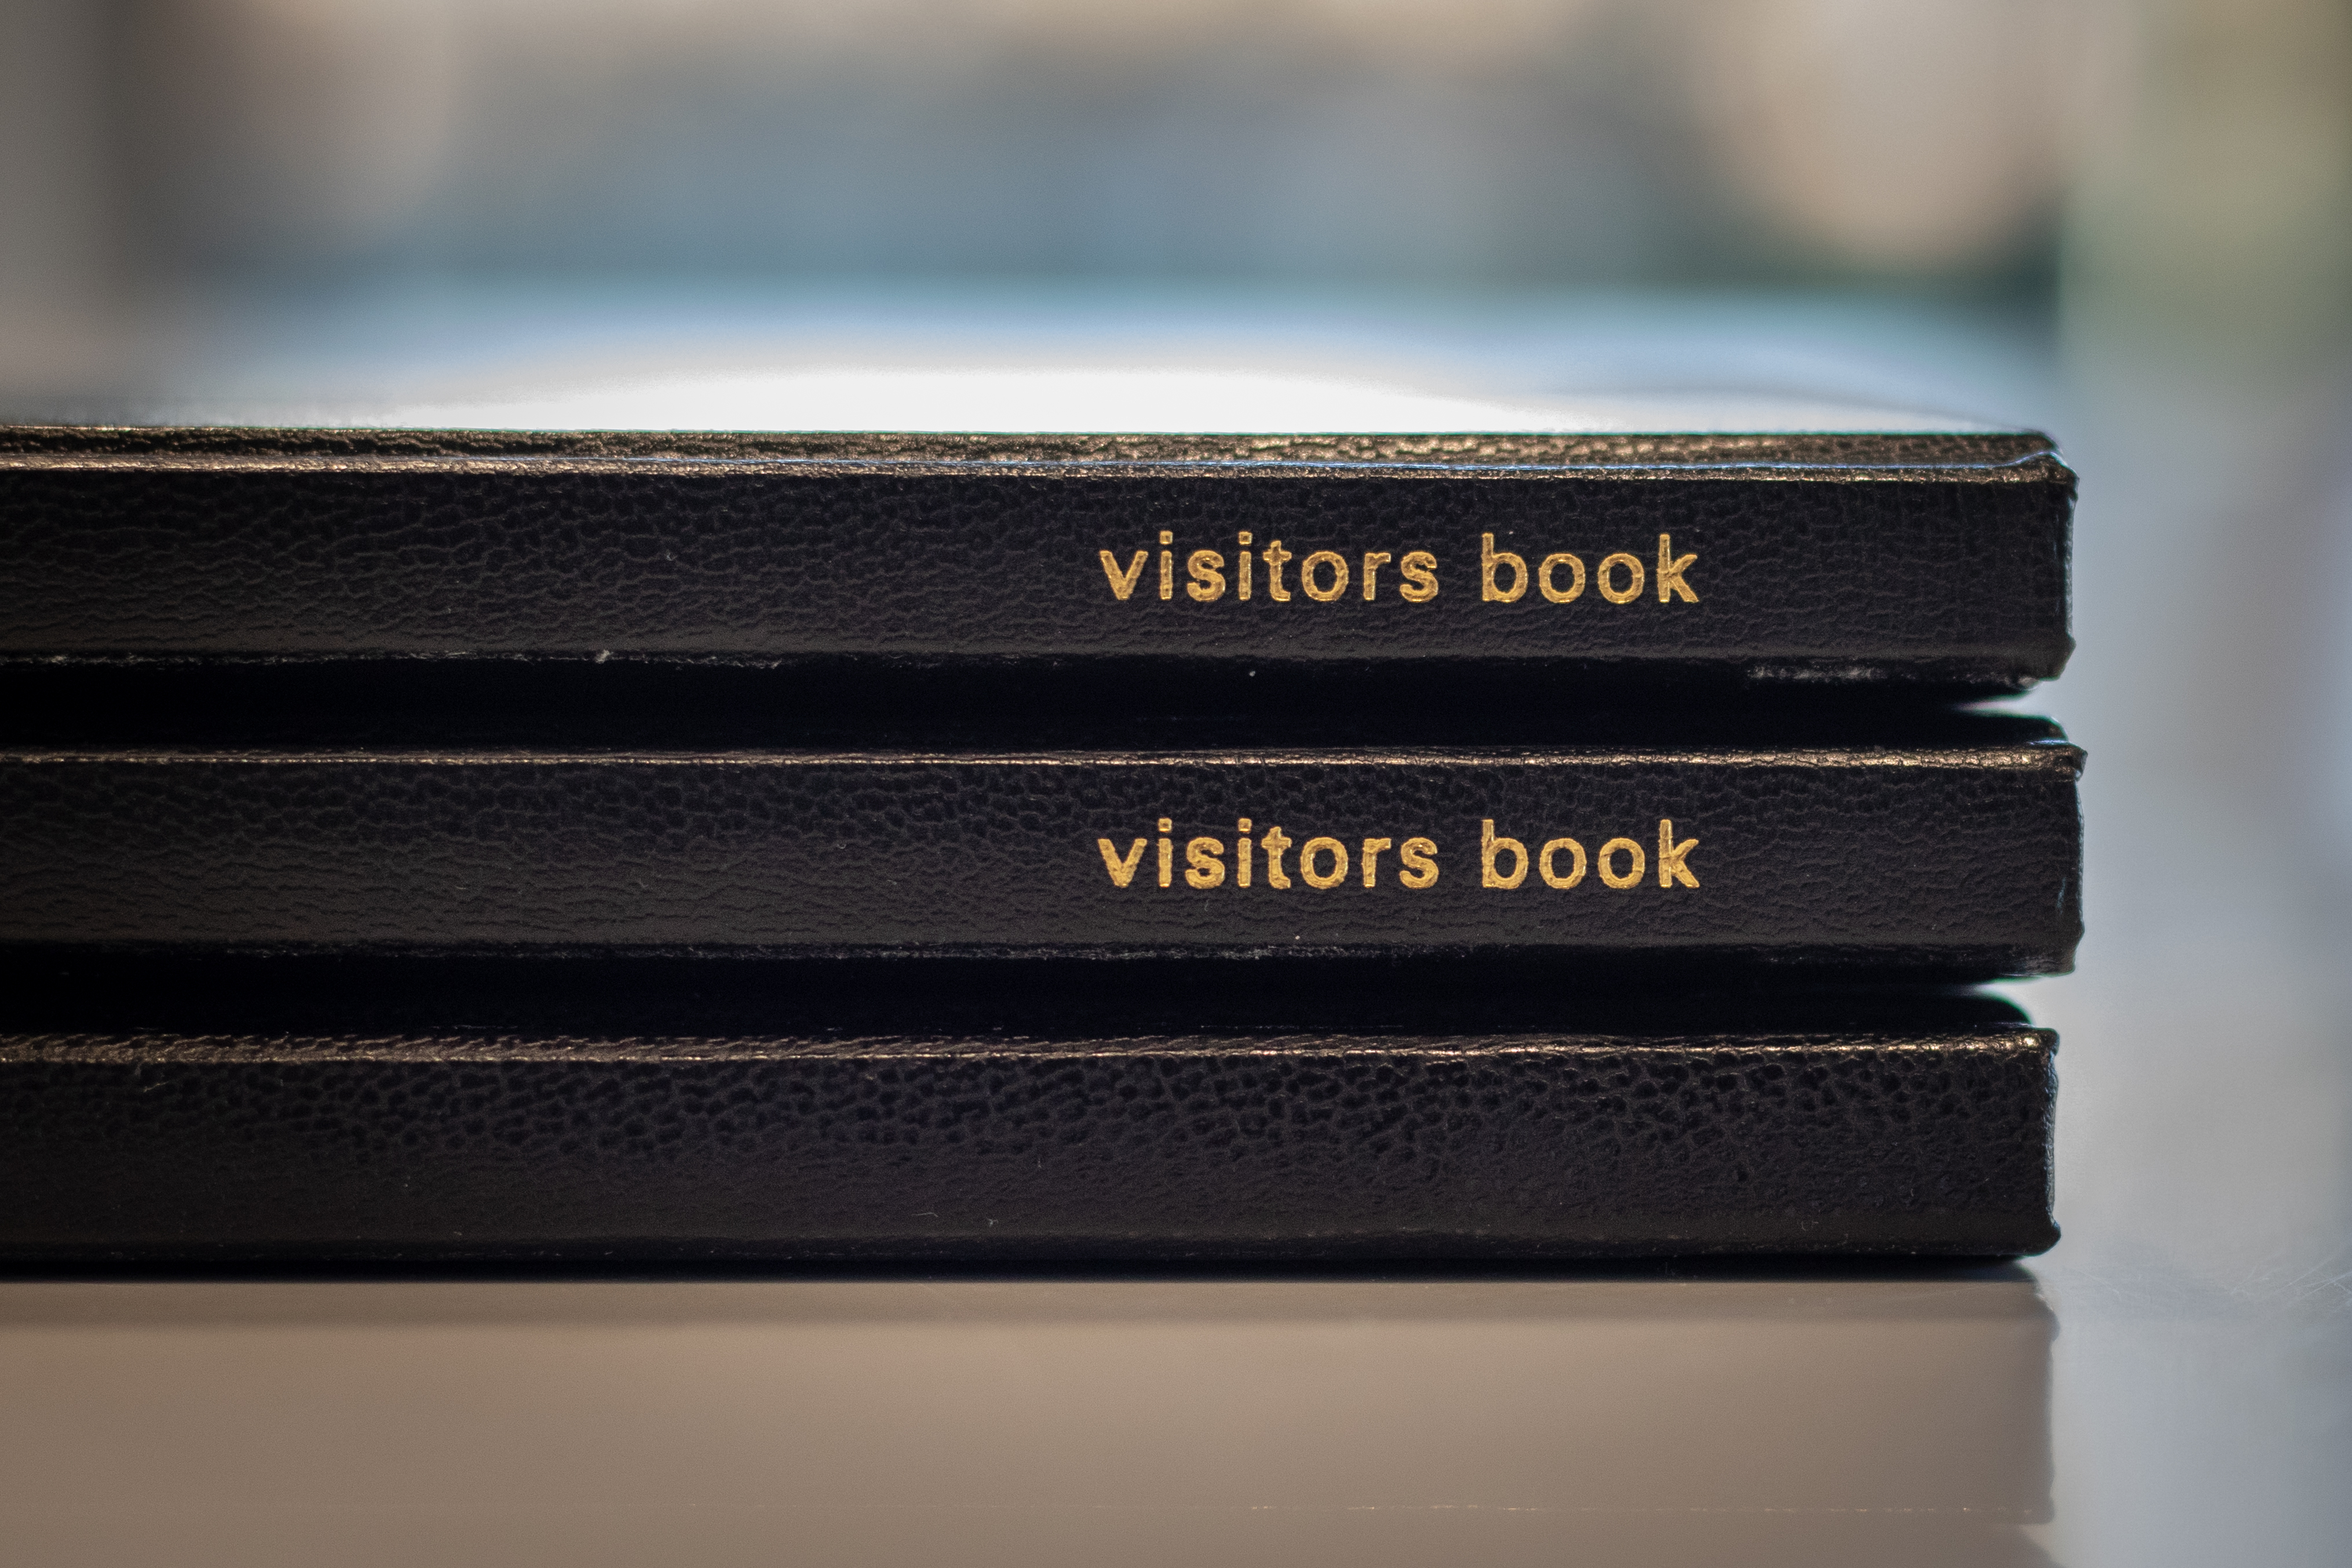 Visitor books at the reception | Source: Shutterstock